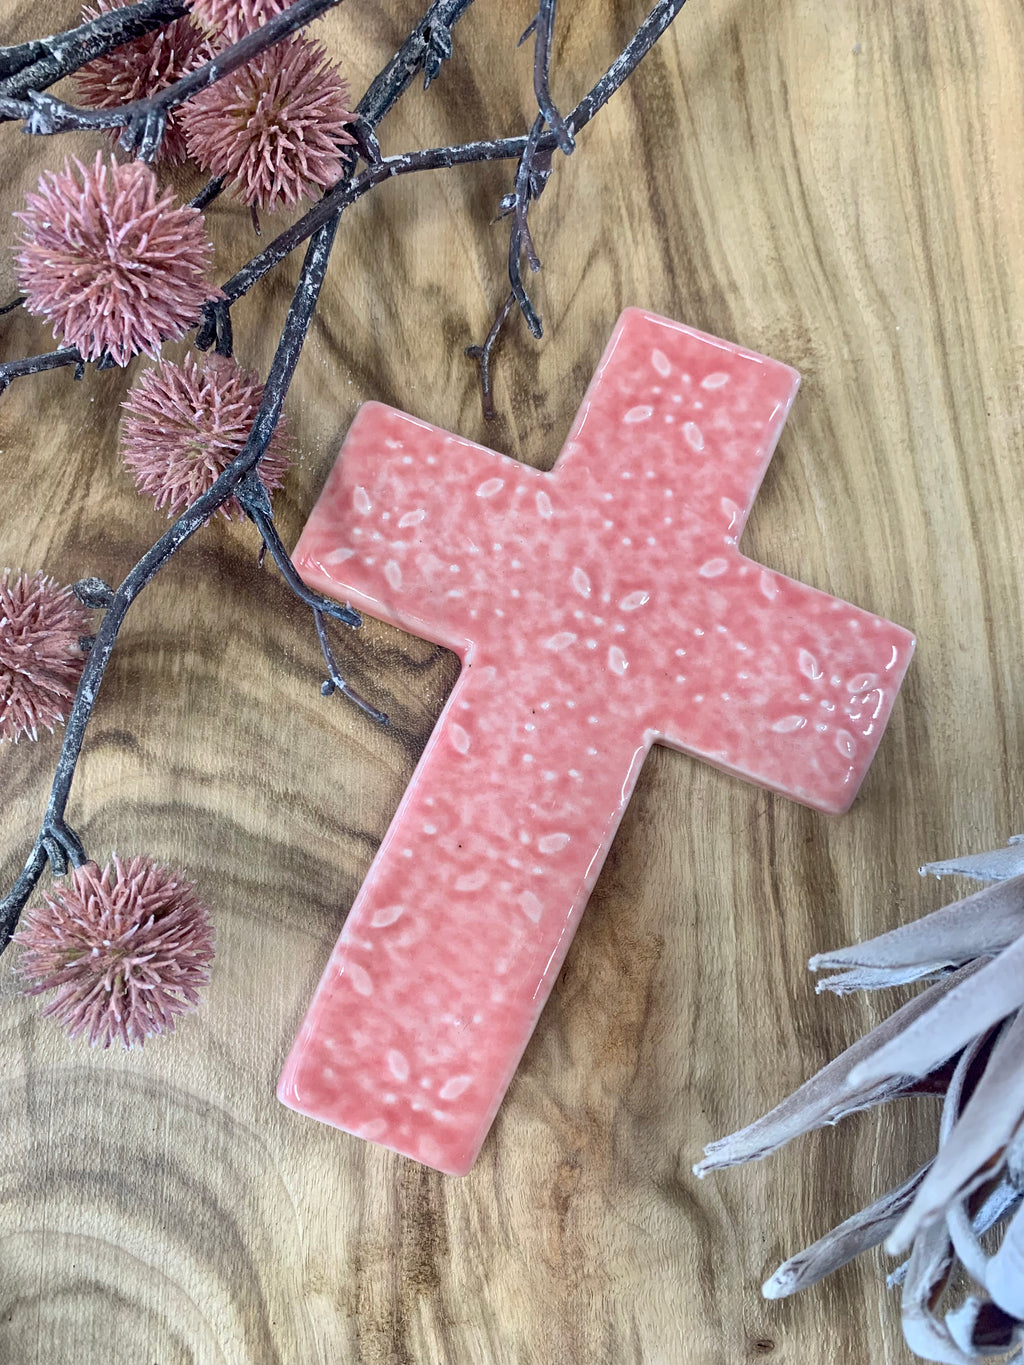 Coral Starry Night Porcelain Cross